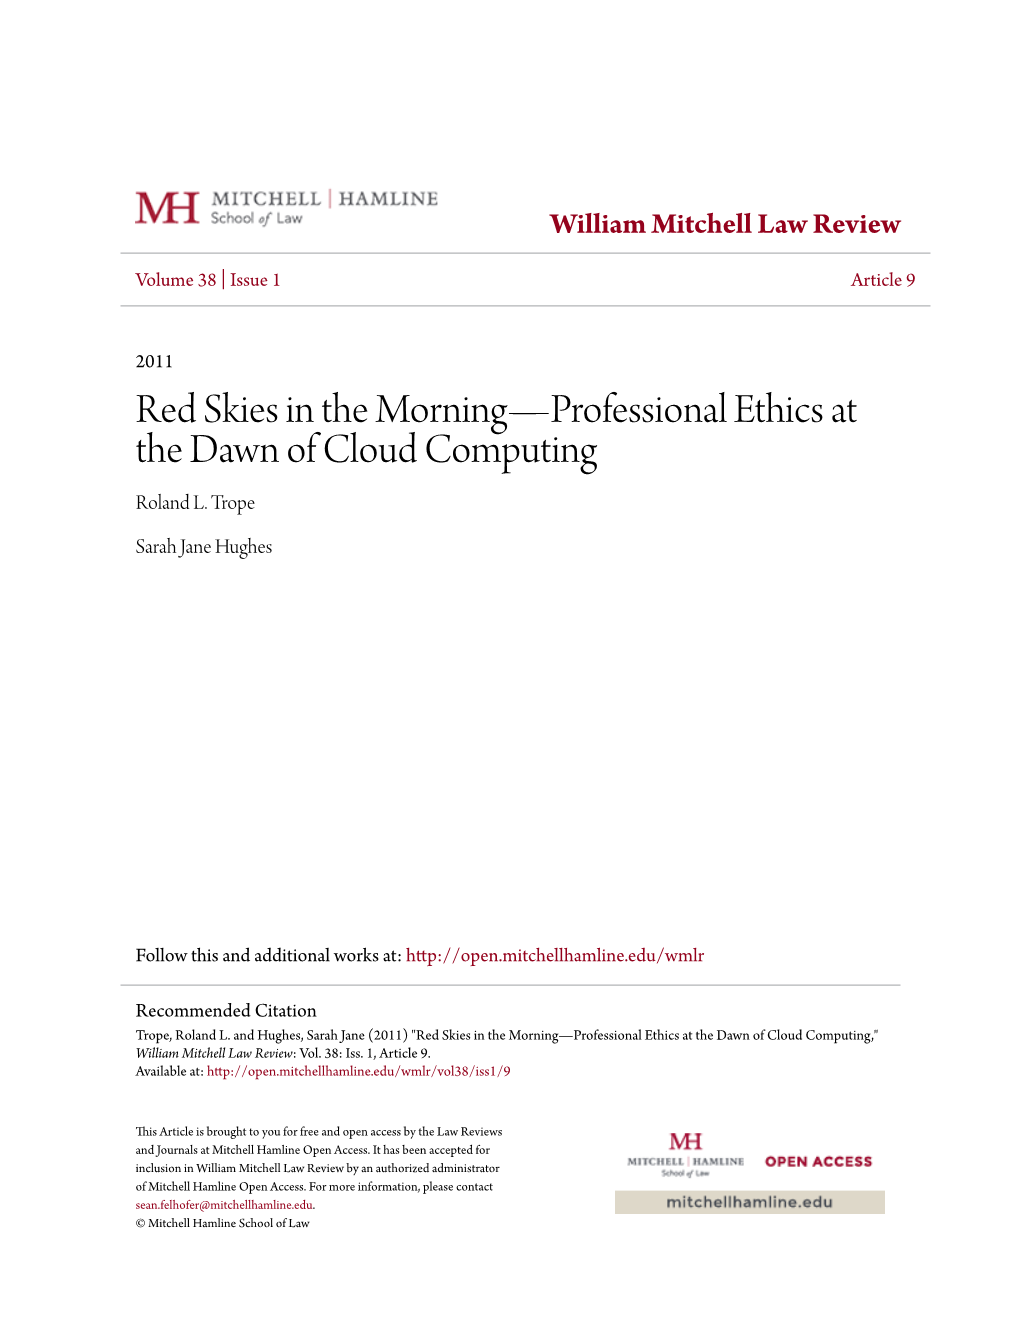 Red Skies in the Morning—Professional Ethics at the Dawn of Cloud Computing Roland L